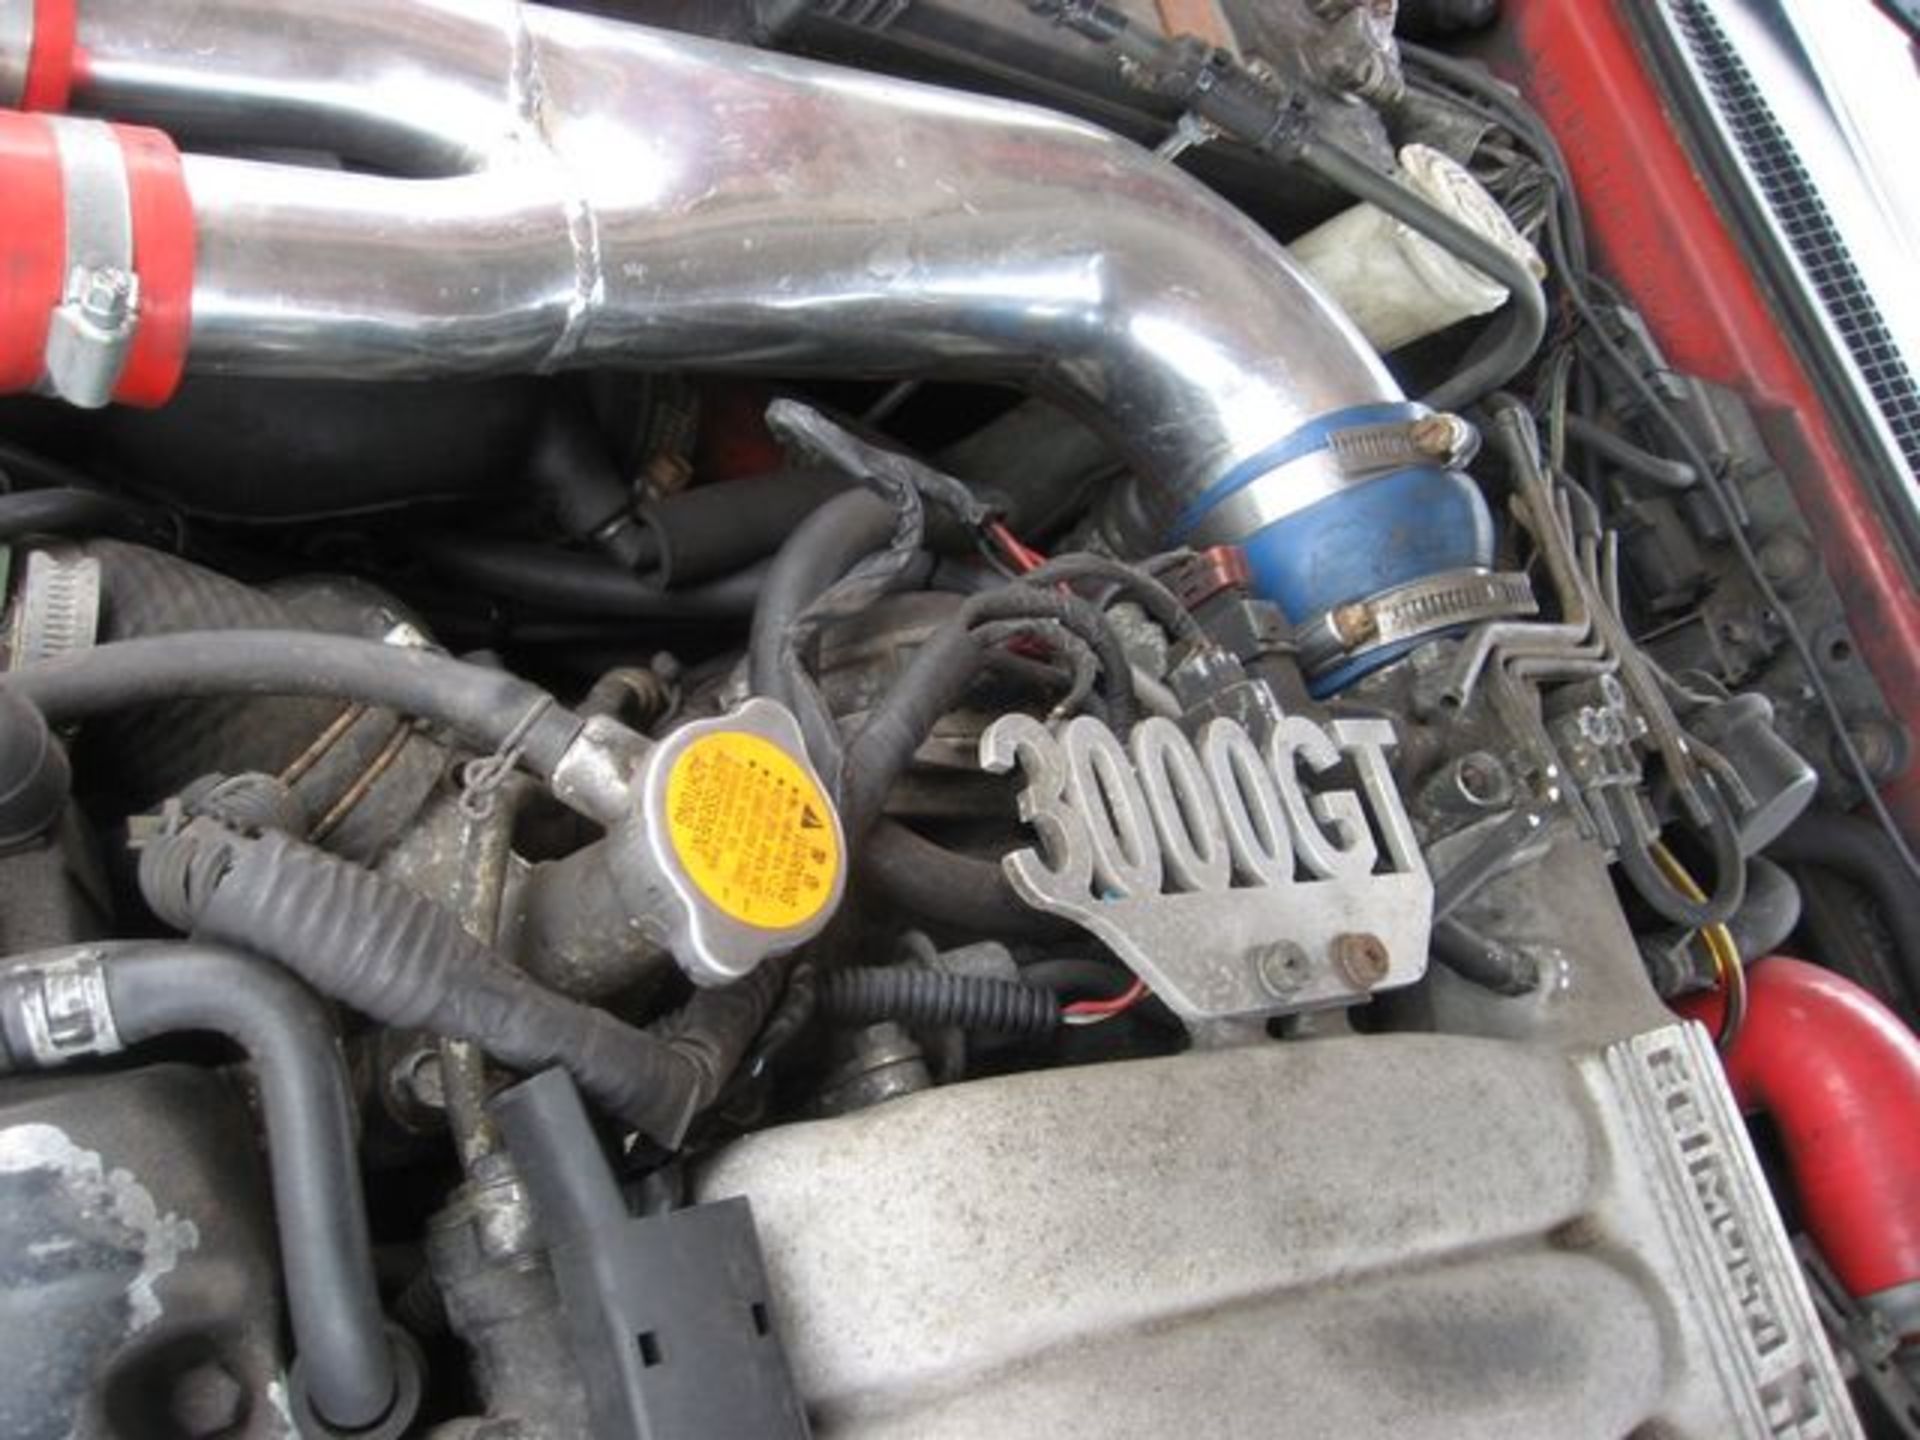 MITSUBISHI, 3000 GT V6 TURBO - 2972cc, Chassis number JMAMNZ16APY000228 - presented with an - Image 15 of 17